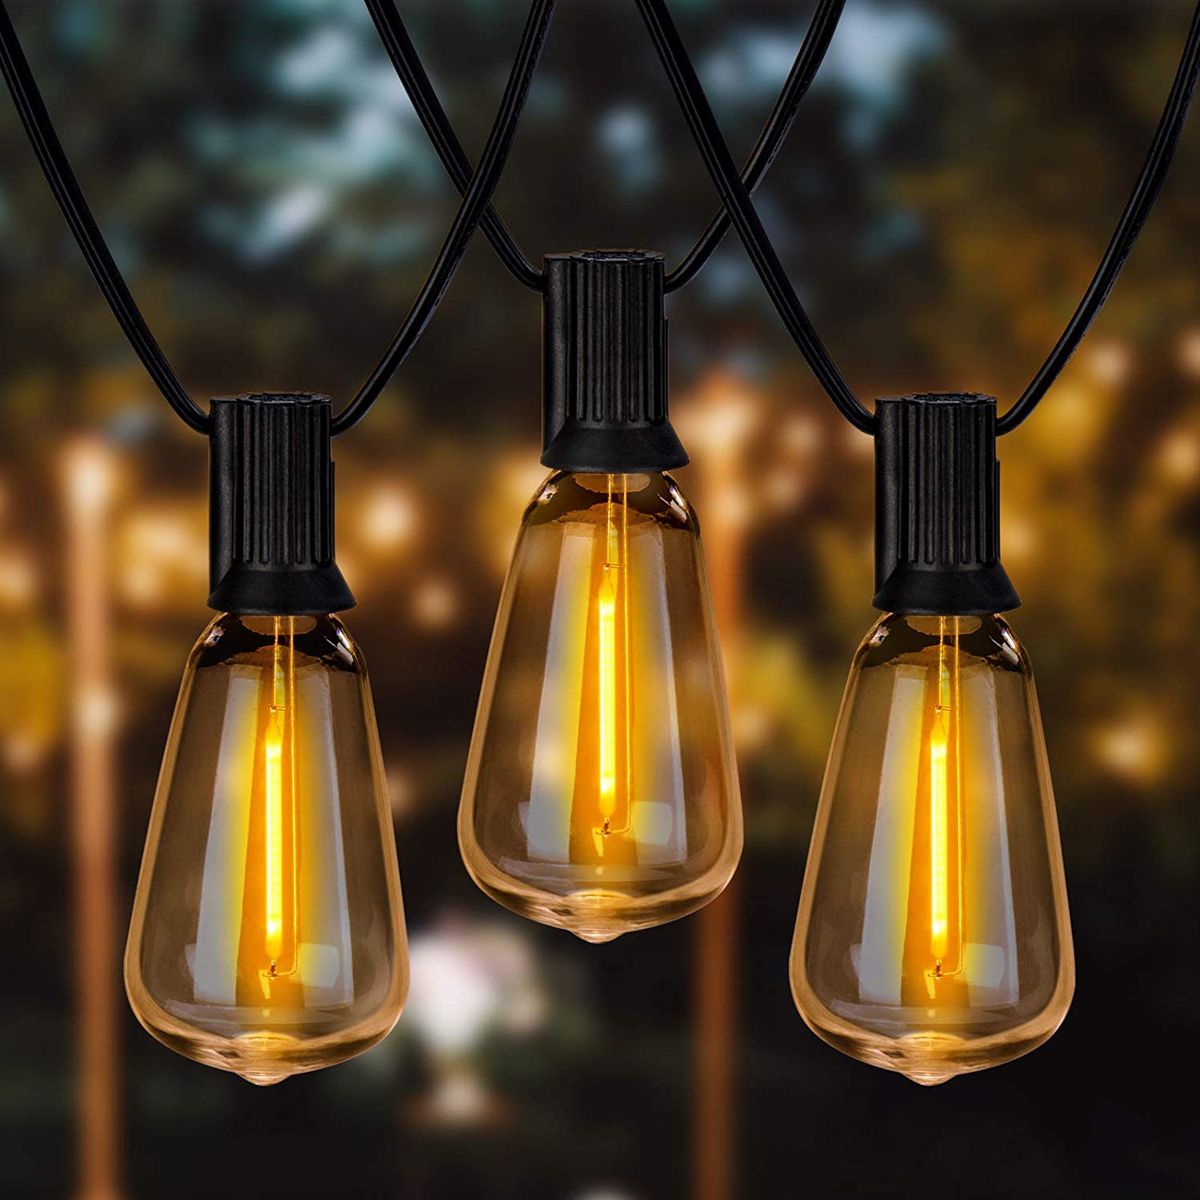 Decorative Light Bulbs Incandescent Bulbs Copper Wire Light Warm White Edison Retro LED Silver Wire Bulb can be Customized Three Colors Colorful Flash 